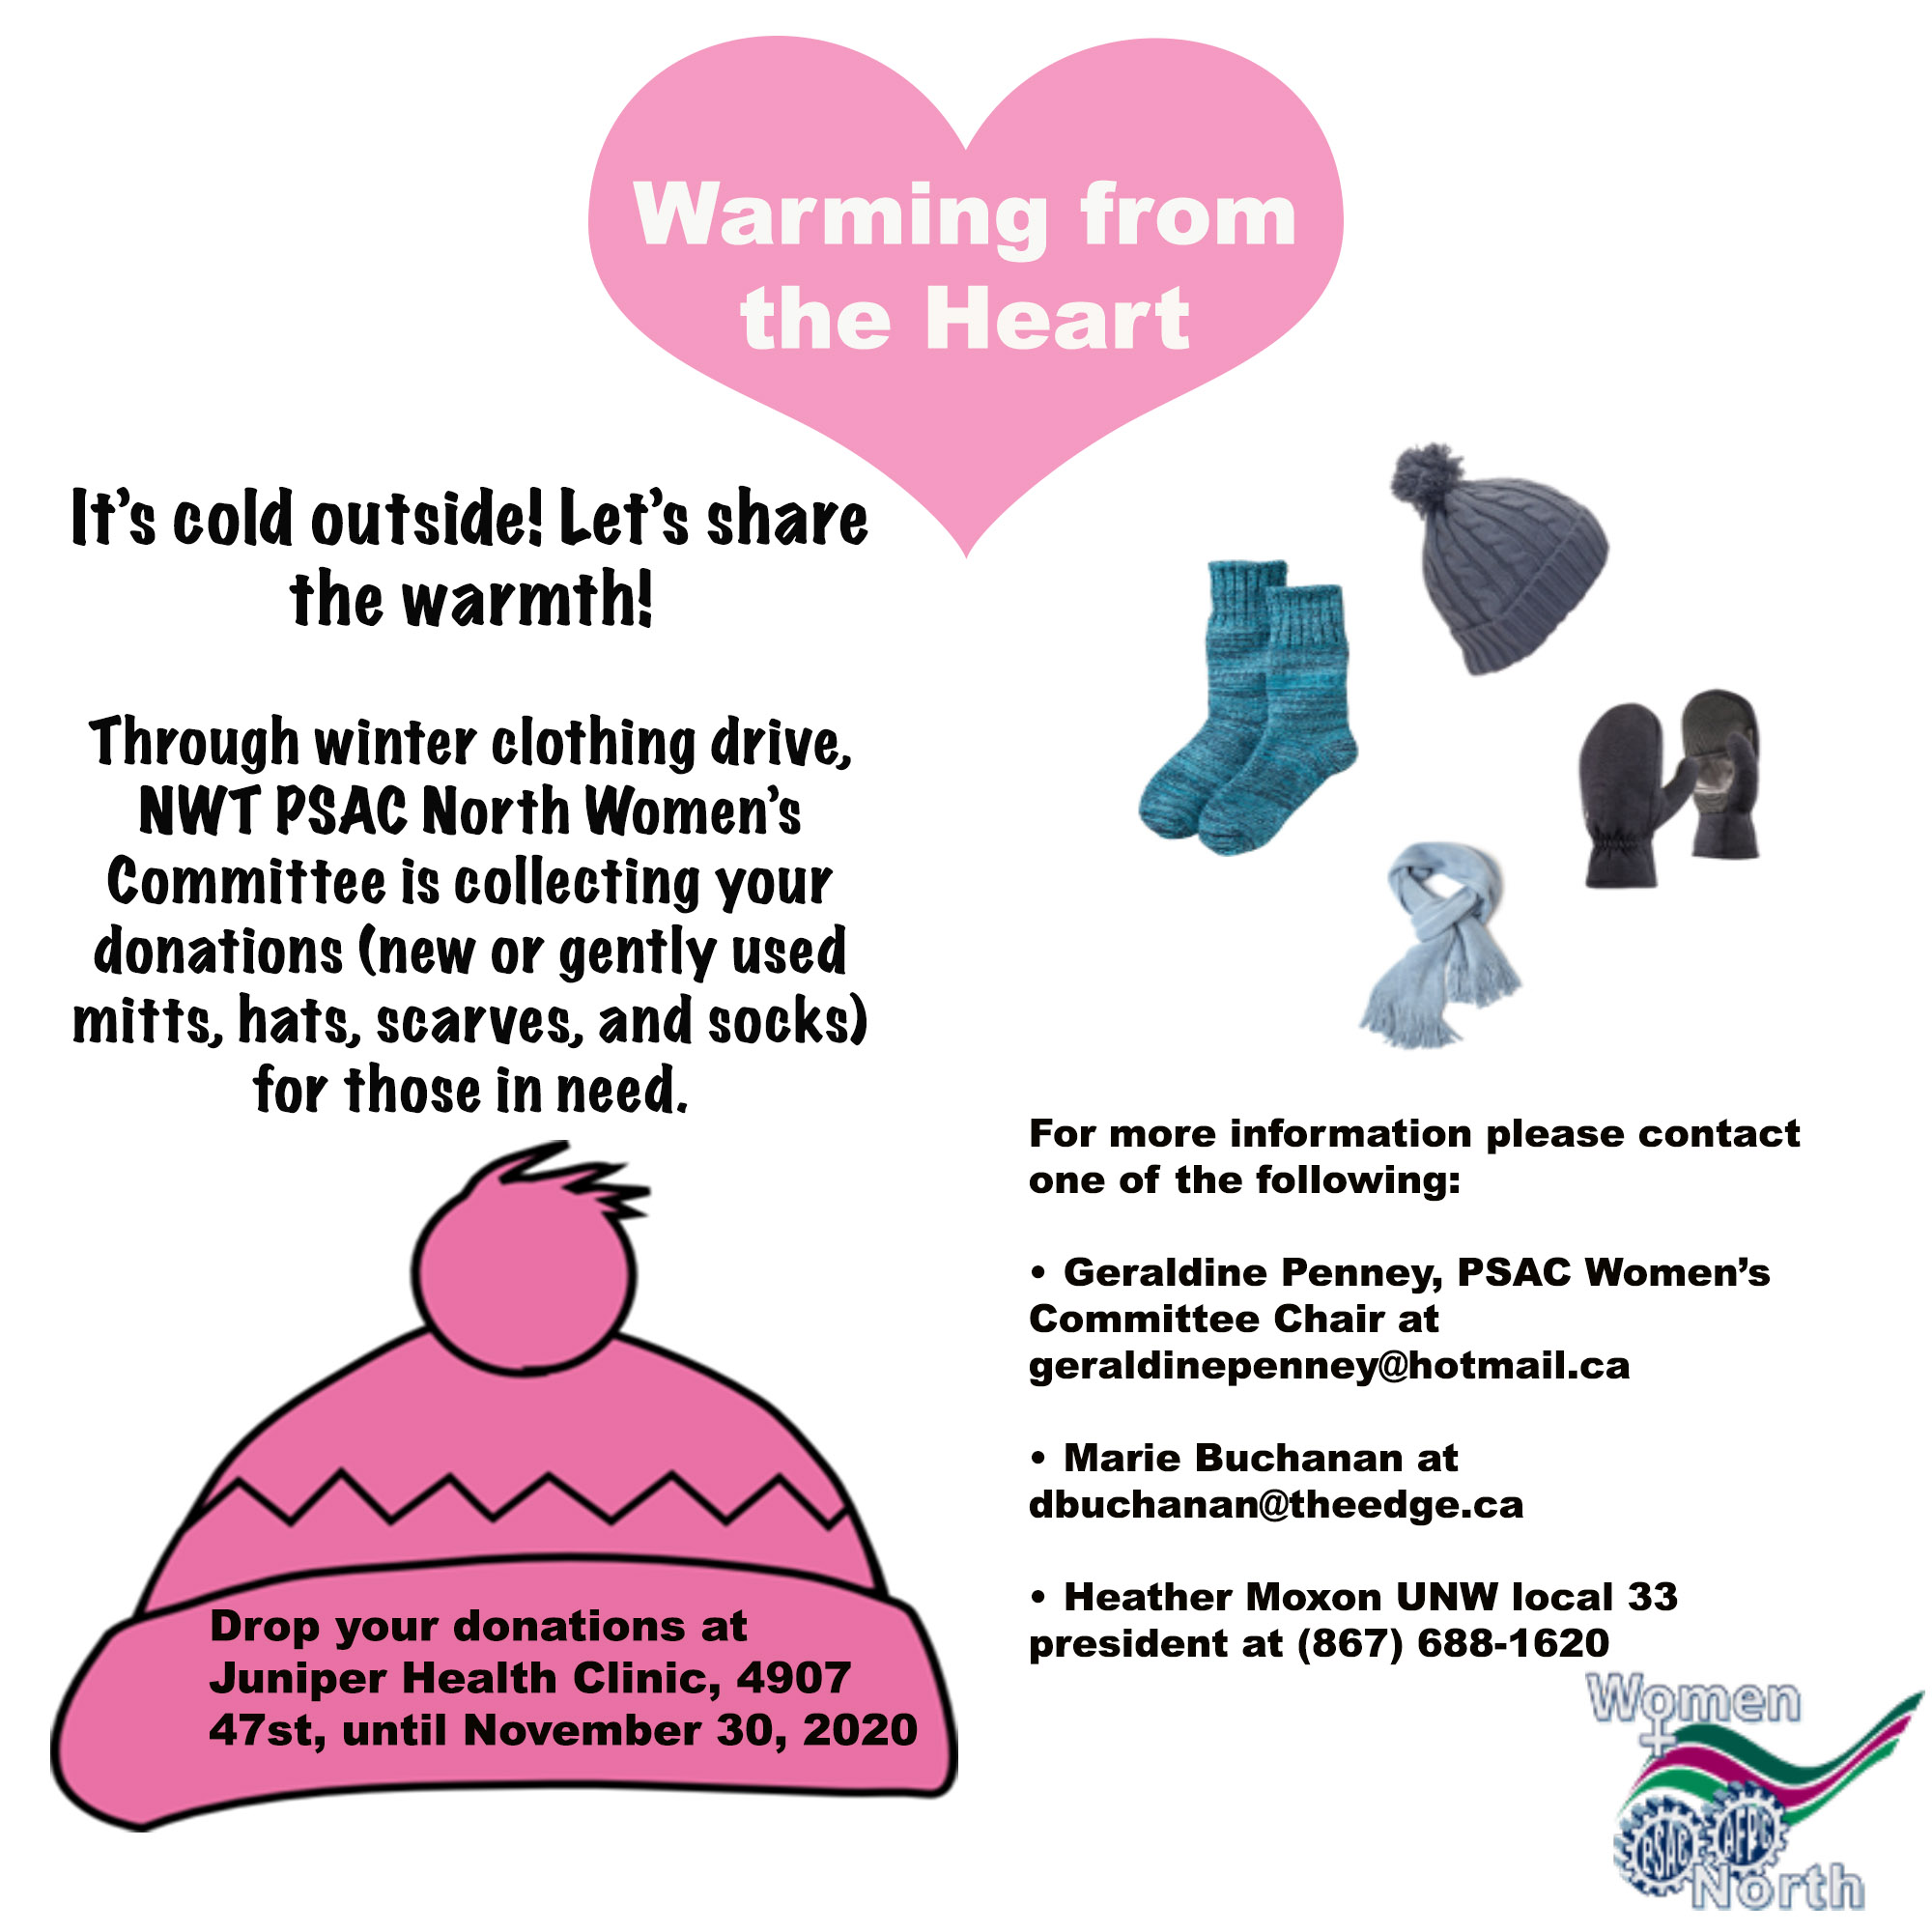 It’s cold outside! Let’s share the warmth!   Through winter clothing drive, NWT PSAC North Women’s Committee is collecting your donations (new or gently used mitts, hats, scarves, and socks) for those in need.   Items can be dropped off at:  Juniper Health Clinic located at 4907 47st, until November 30th, 2020 For additional information please contact one of the following:  Geraldine Penney, PSAC Women’s Committee Chair at geraldinepenney@hotmail.ca Marie Buchanan at dbuchanan@theedge.ca Heather Moxon UNW local 33 president at (867) 688-1620